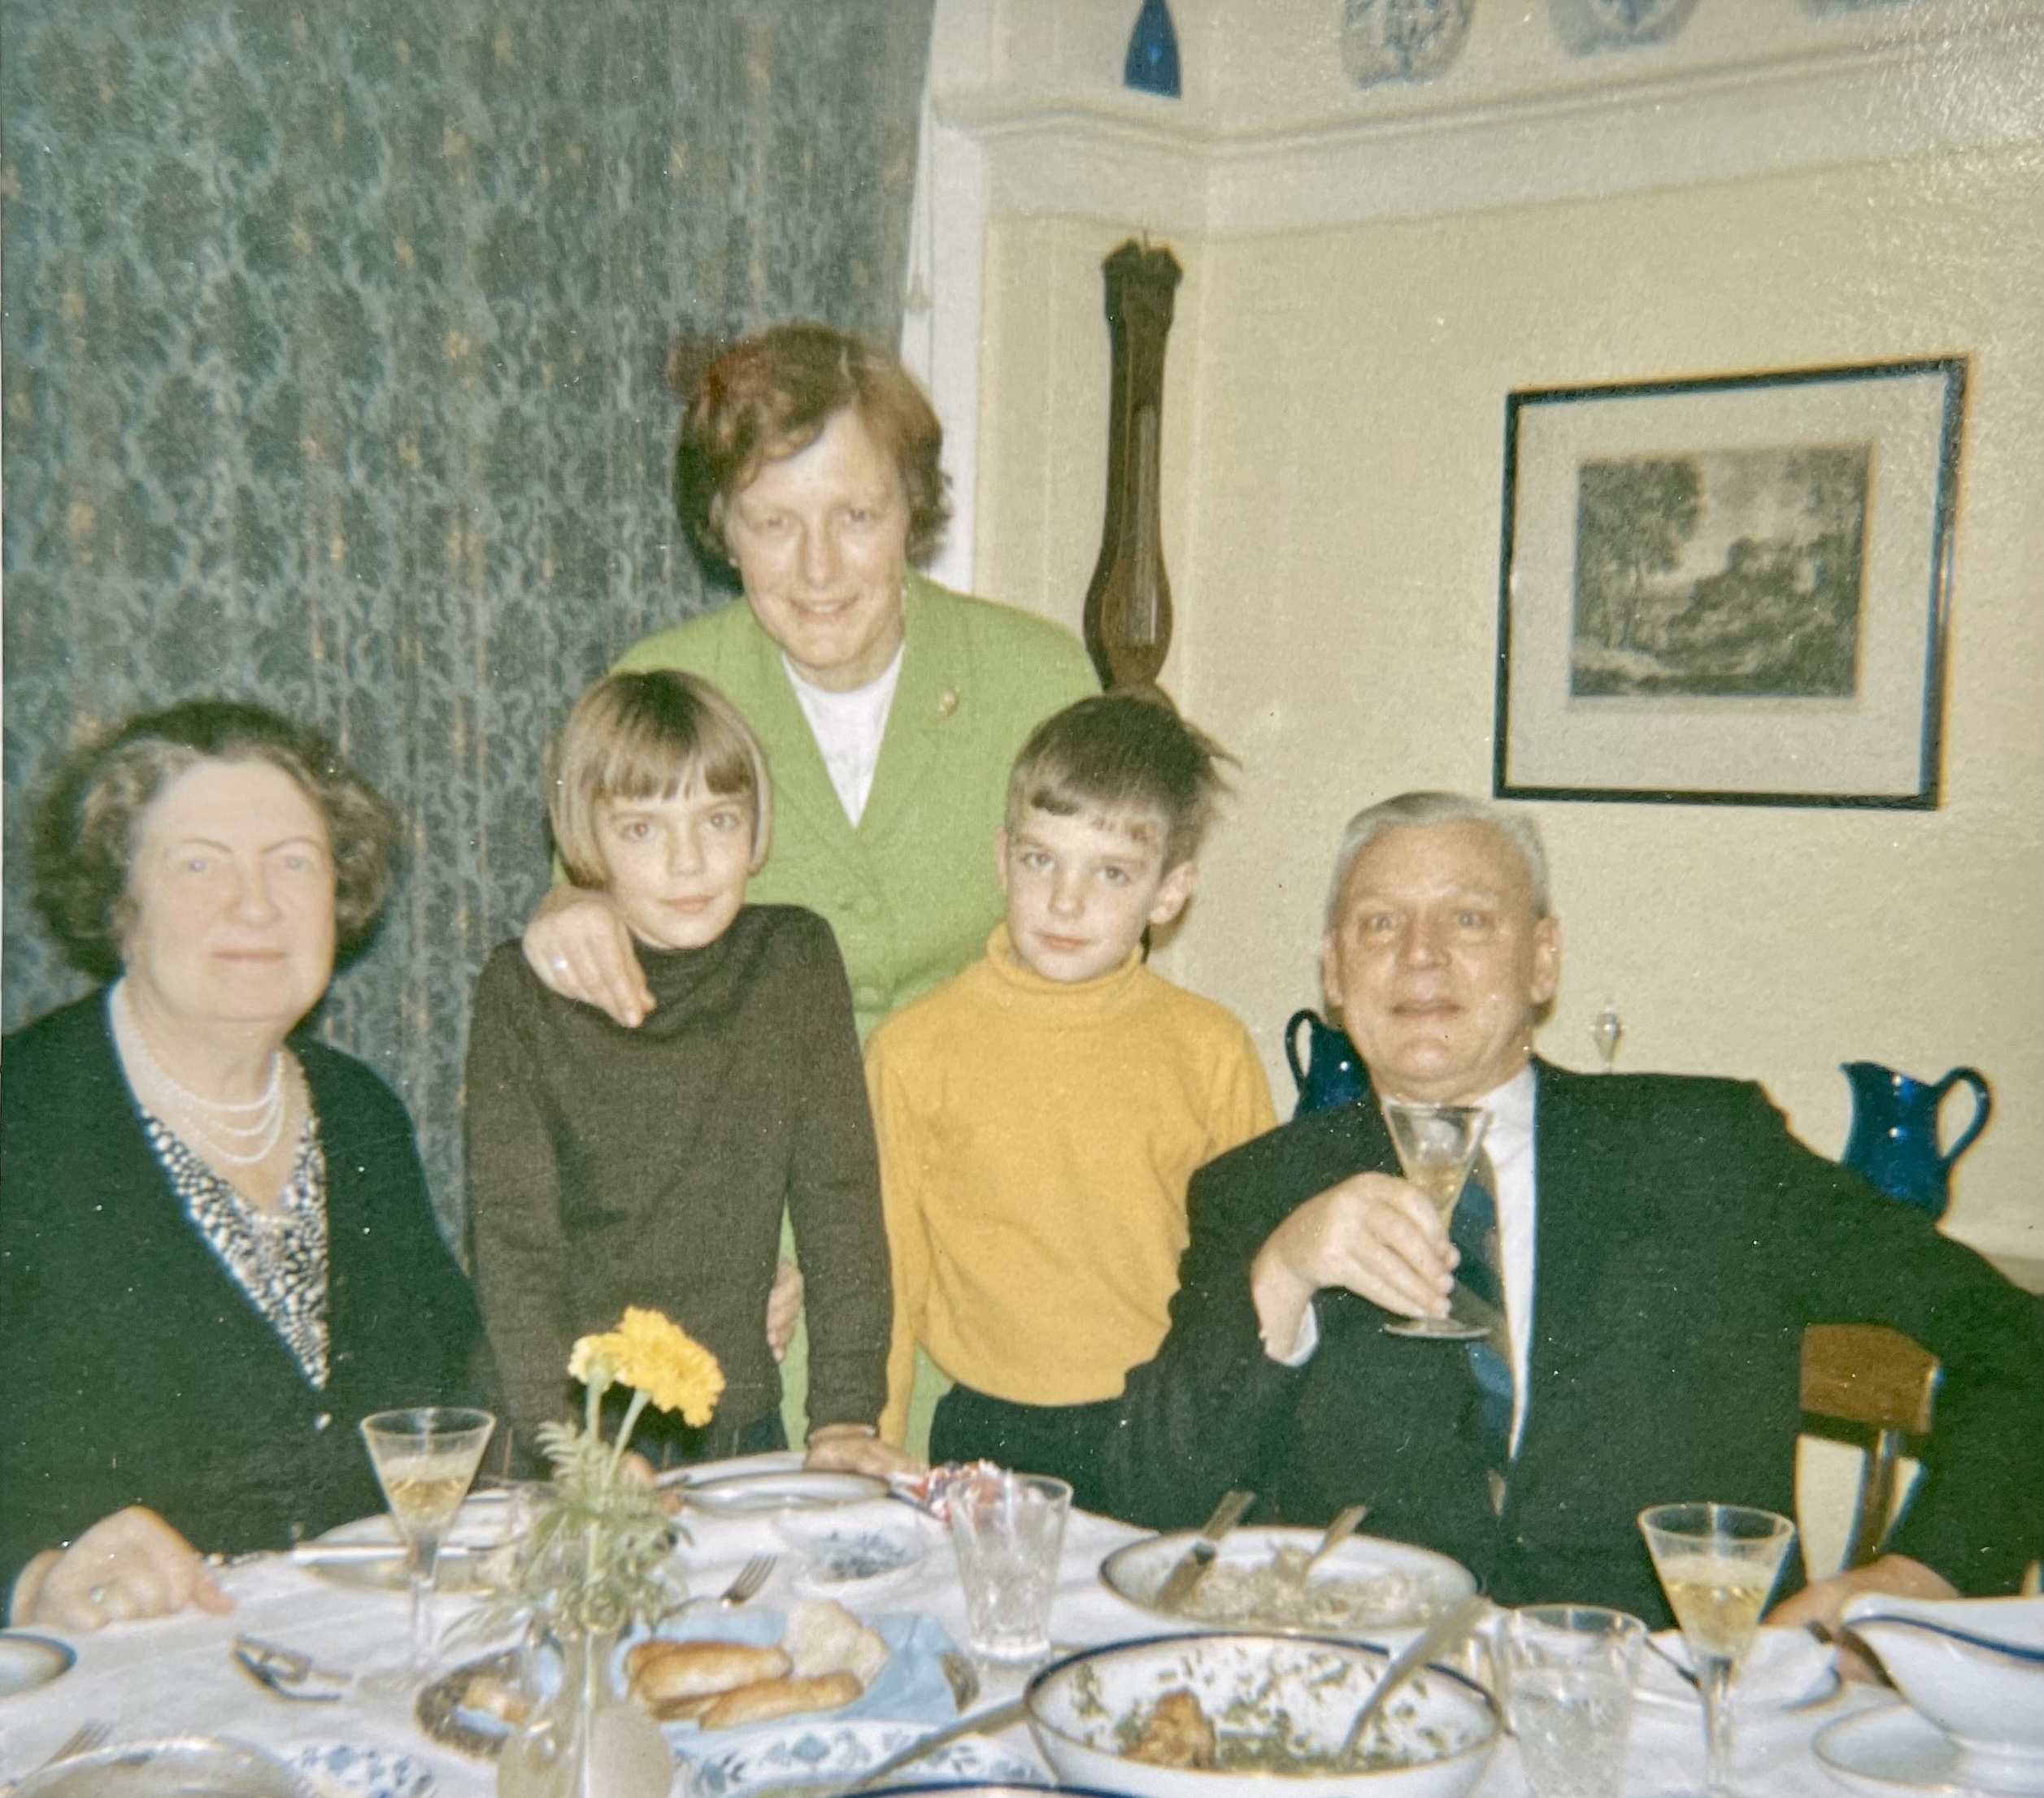 Photograph with three adults, two children, a table set with food in foreground. 